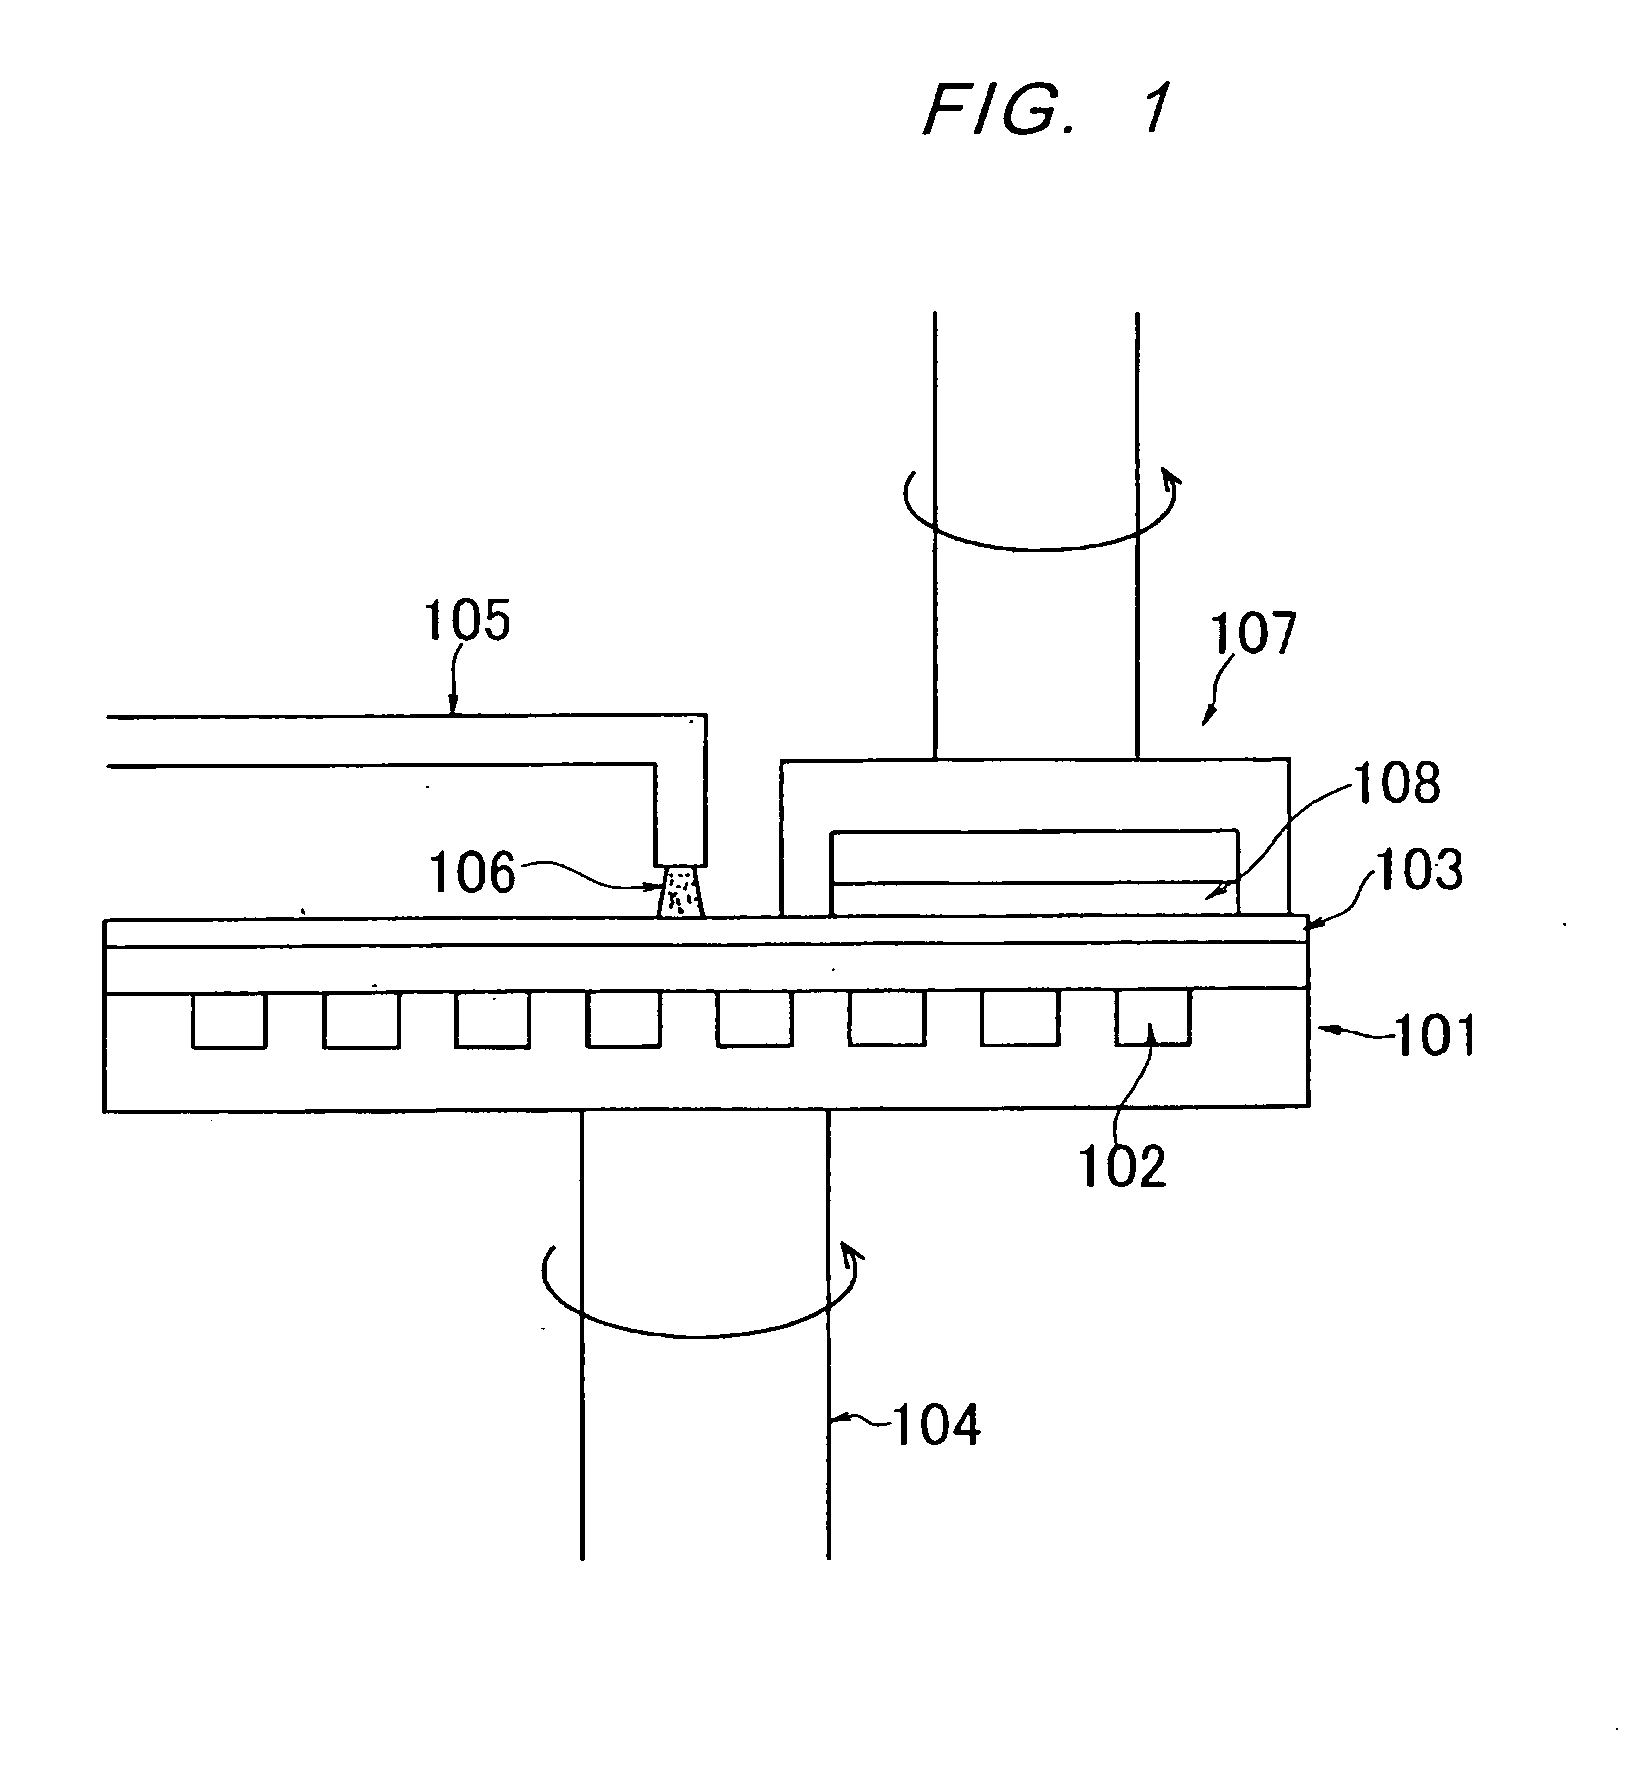 Apparatus for heating or cooling a polishing surface of a polishing appratus